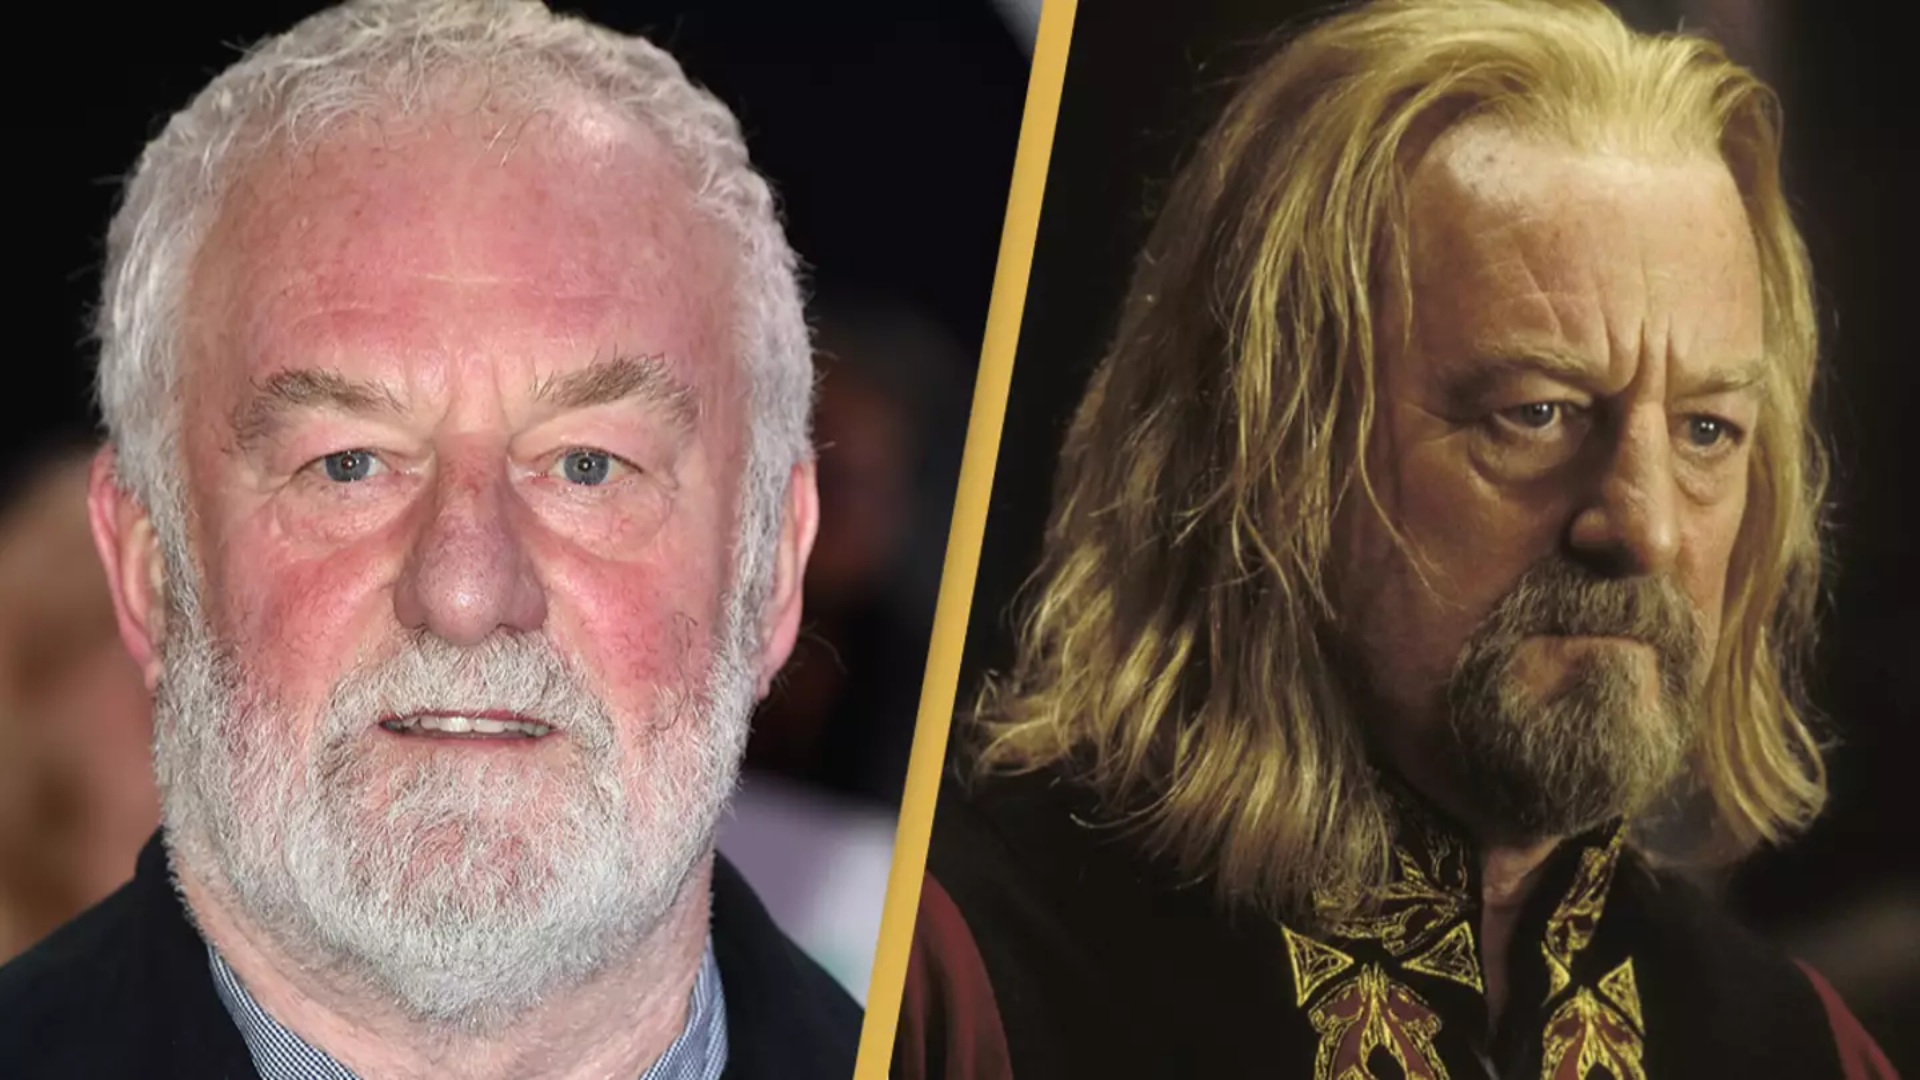 What are the notable roles of Bernard Hill as mentioned in the articles?